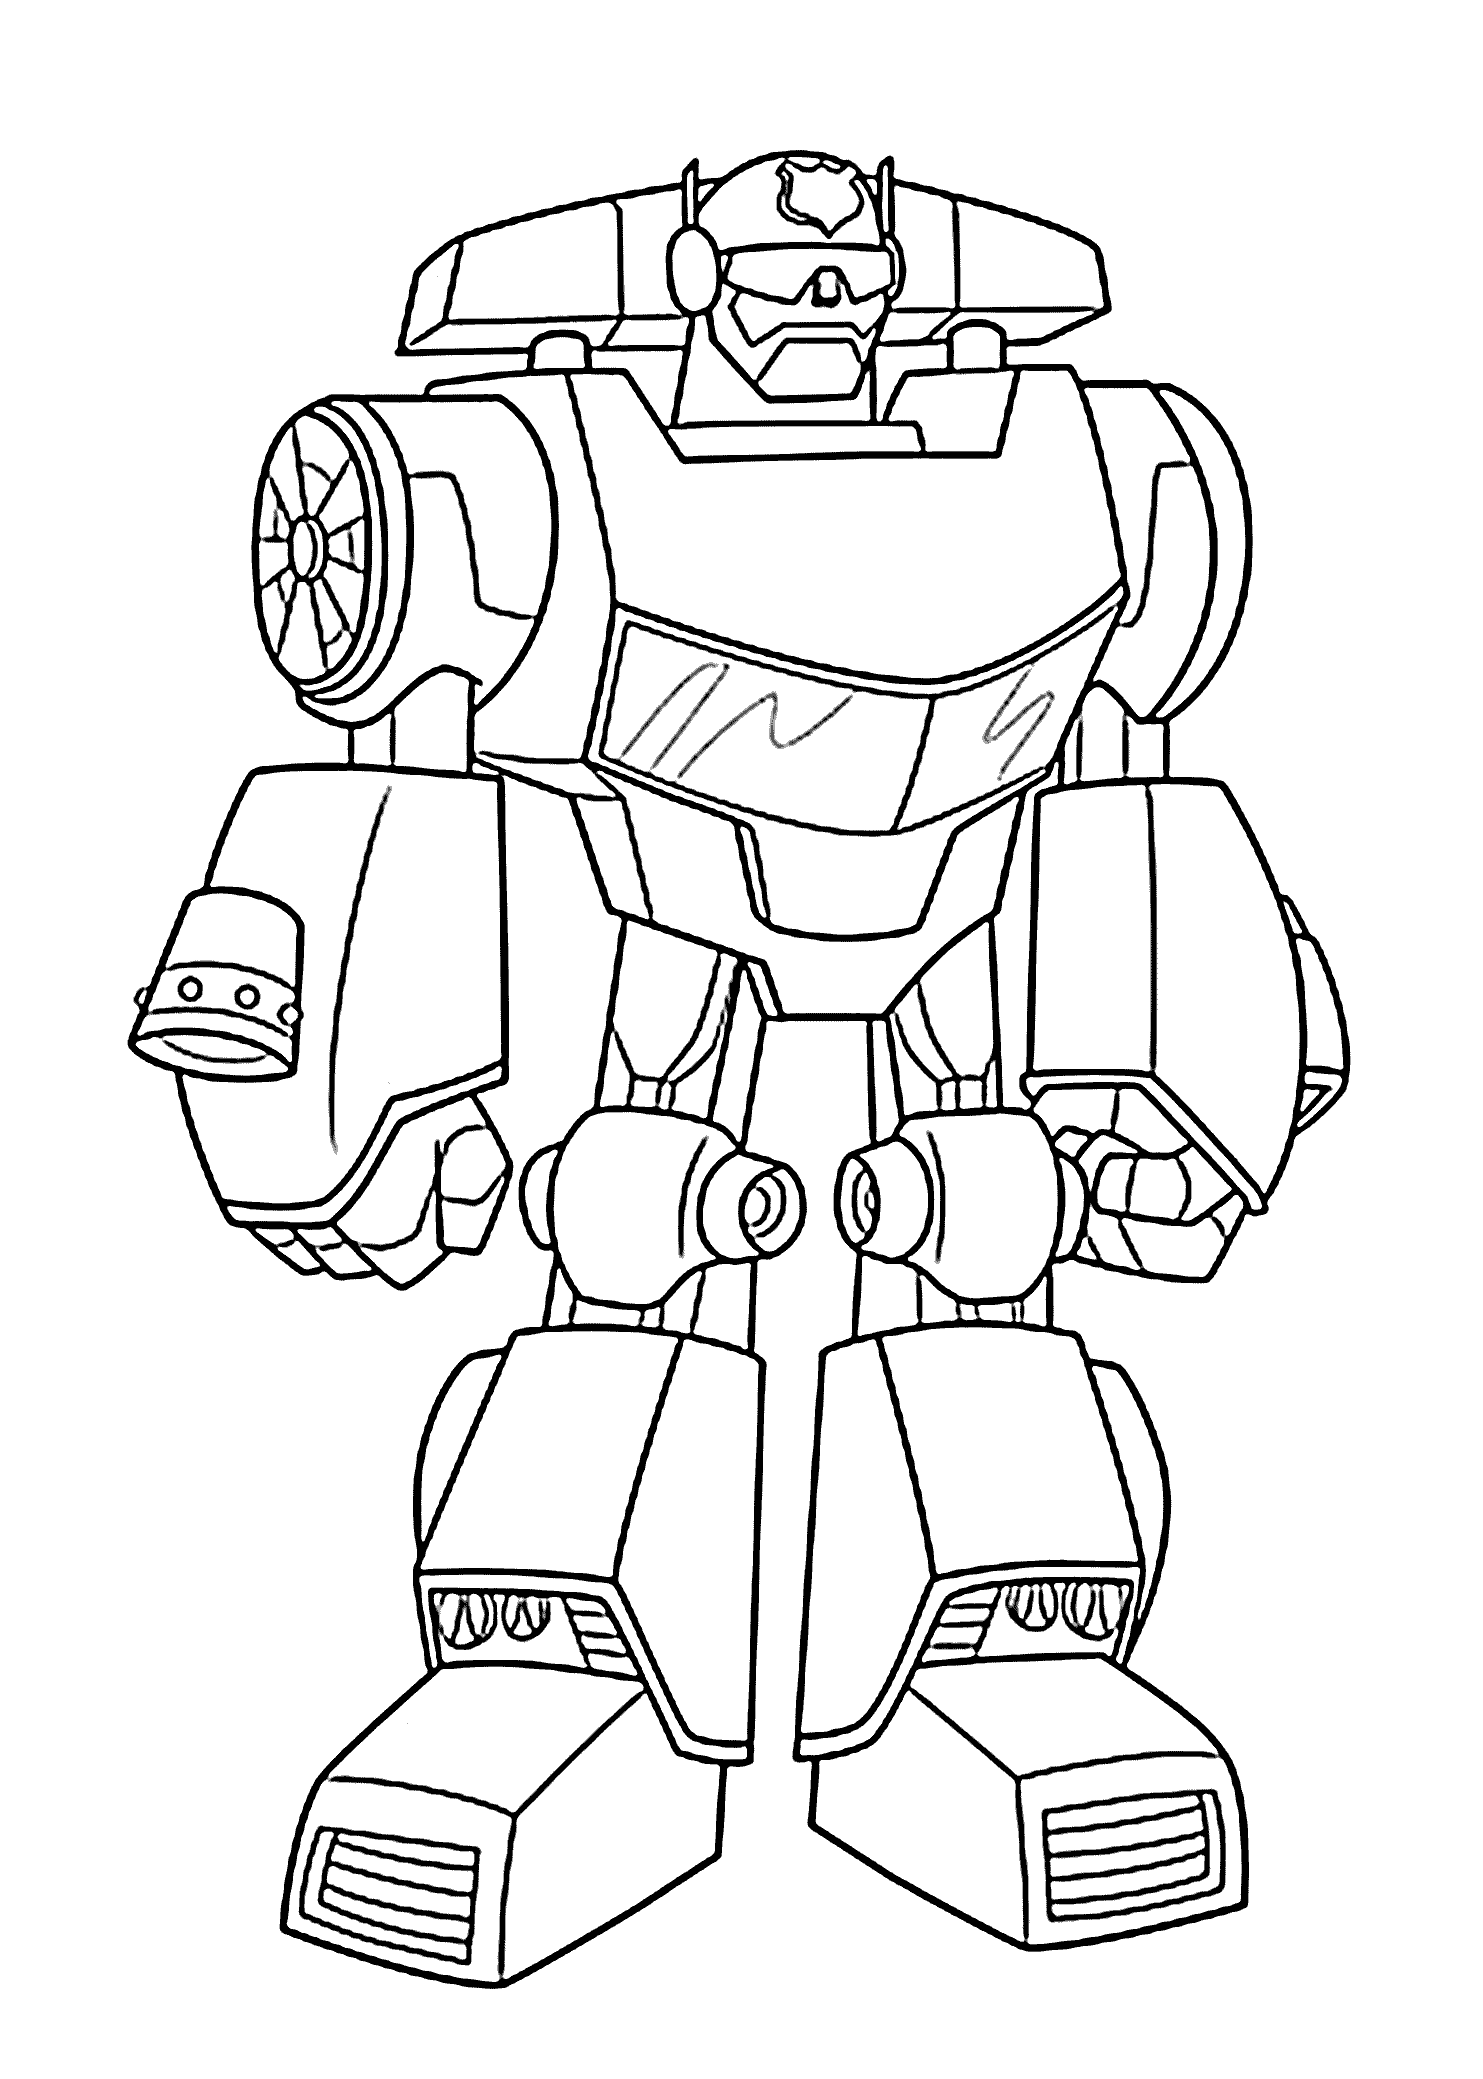 transformer coloring page transformers coloring pages coloring pages to print page coloring transformer 